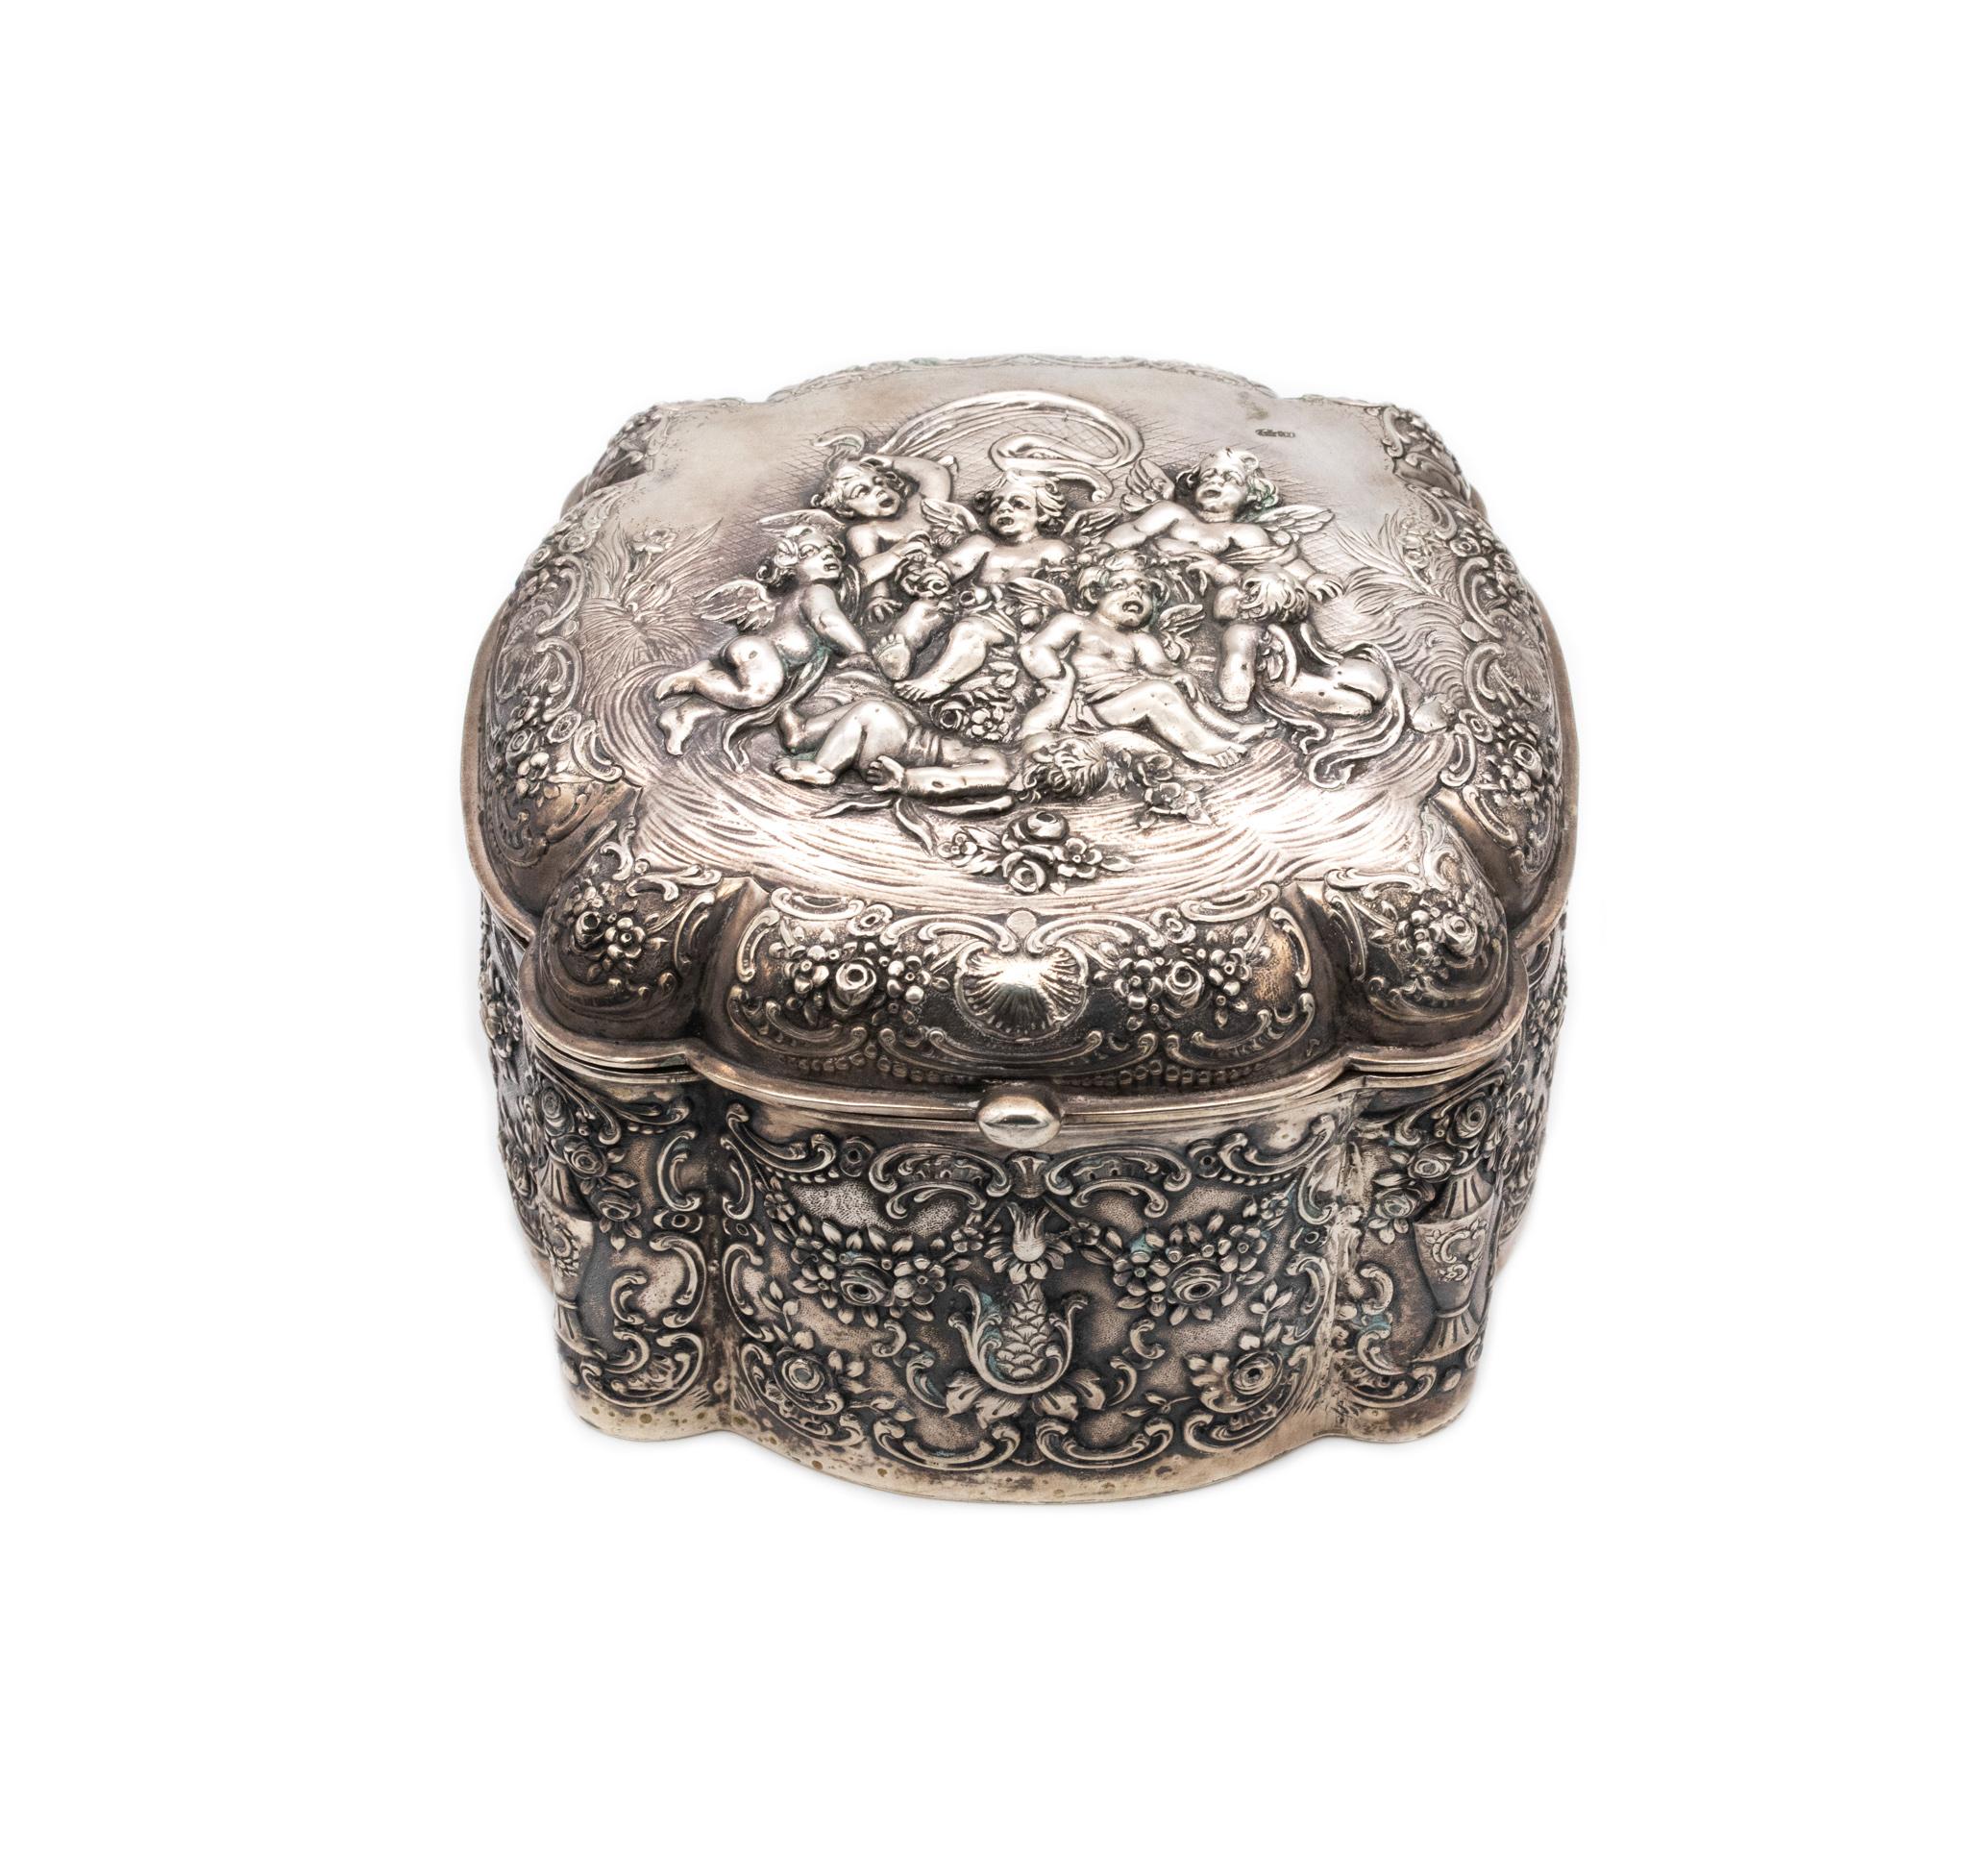 Gorgeous German box in sterling silver.

An impressive highly decorated north European piece, made in Germany during the Imperial period, circa 1890-1910. It was totally crafted in repousse of solid .800/.999 sterling silver, with the interiors